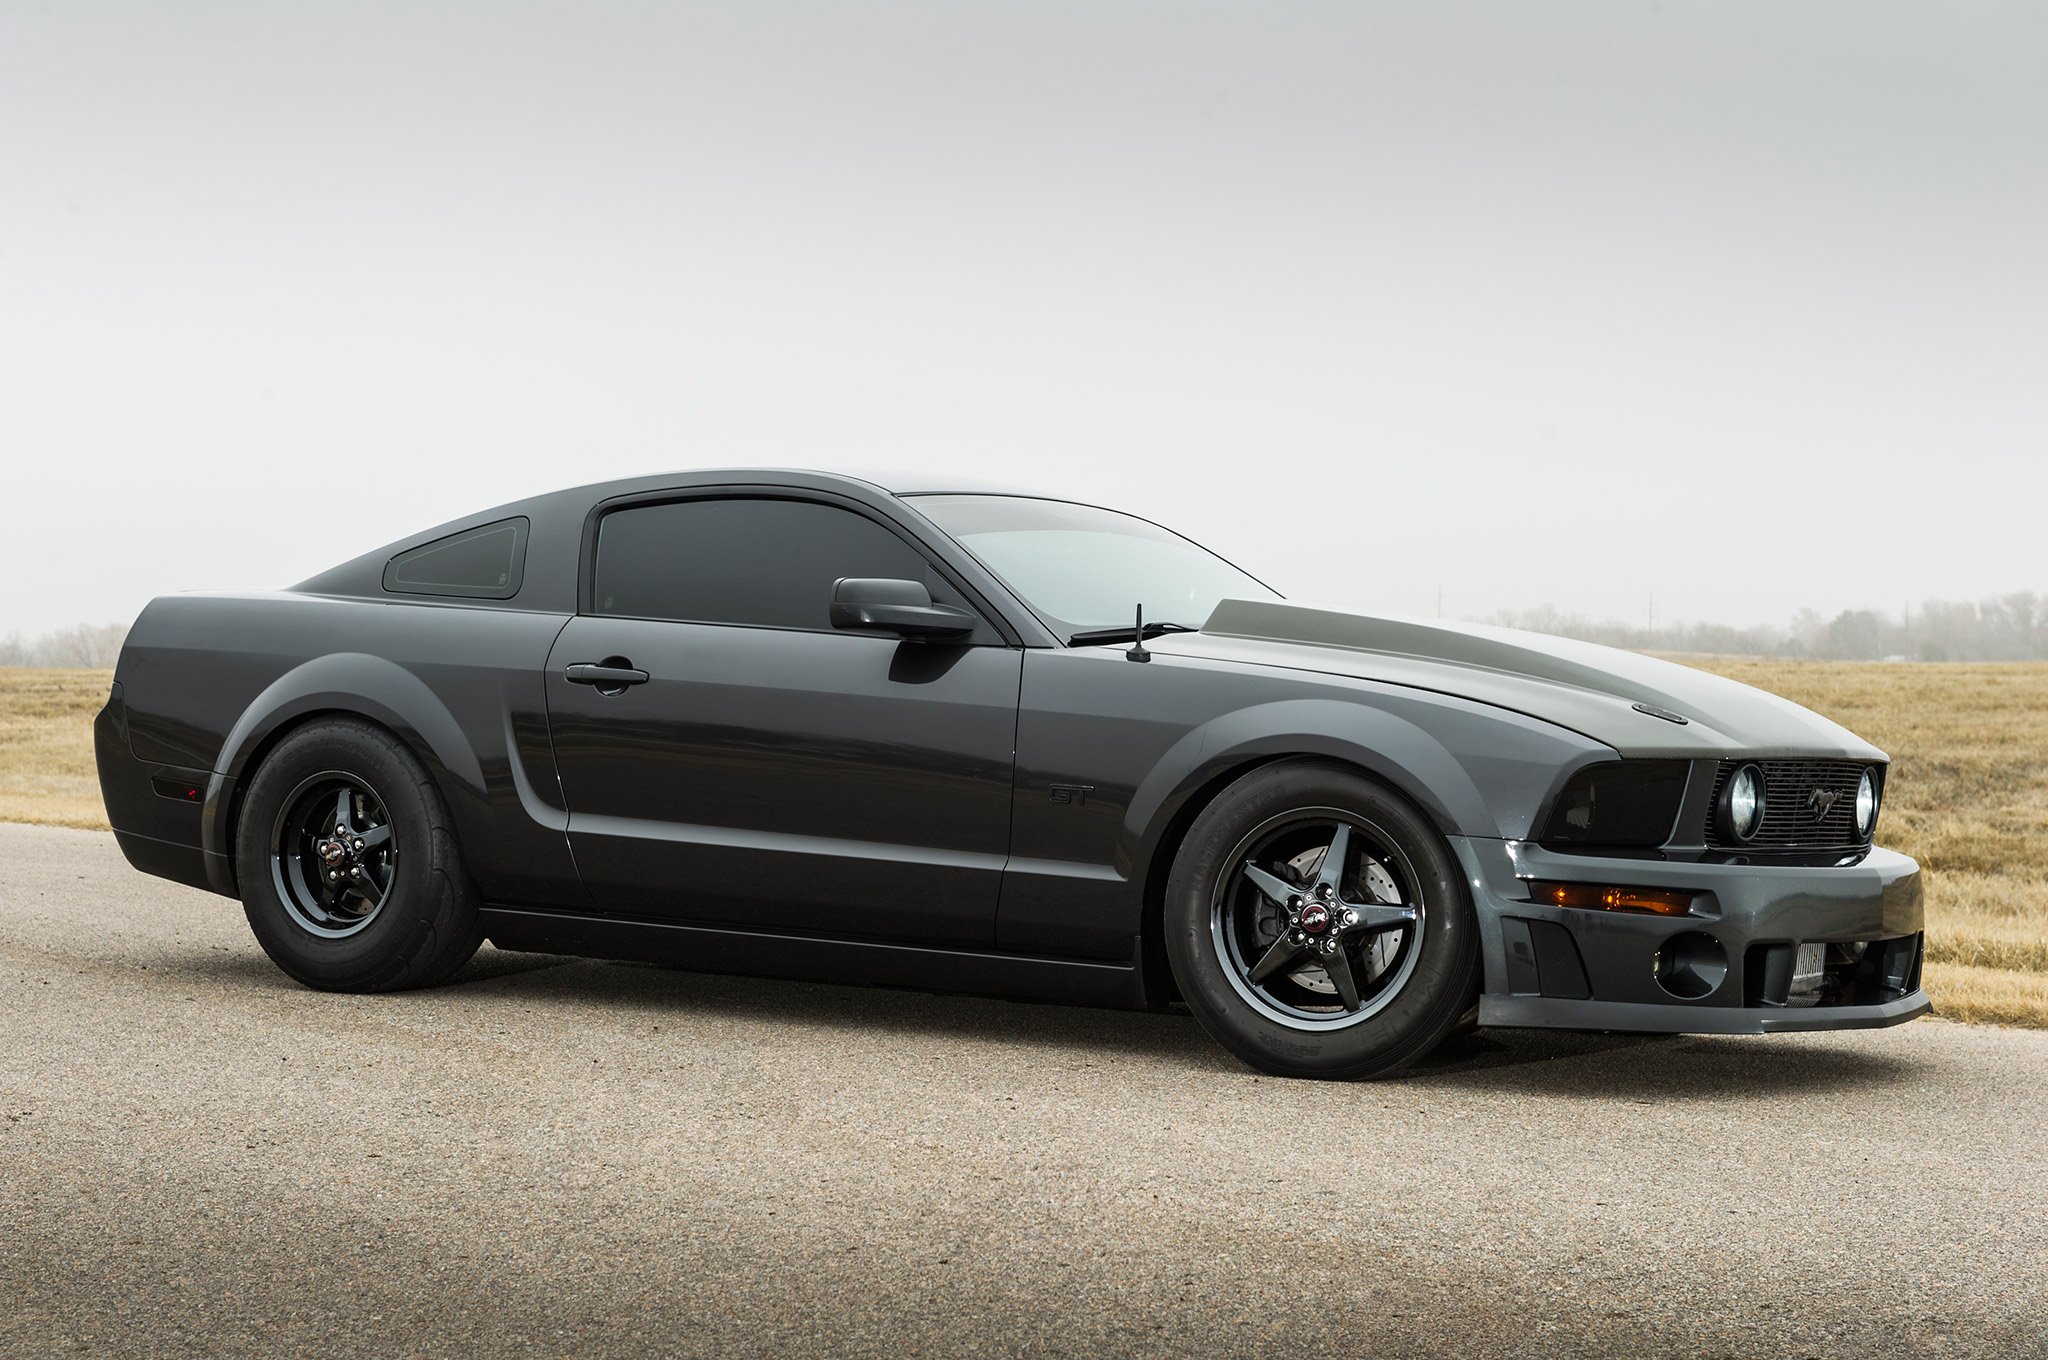 2007, Ford, Mustang, Gt, Pro, Street, Super, Drag, Muscle, Usa, 2048x1360 12 Wallpaper